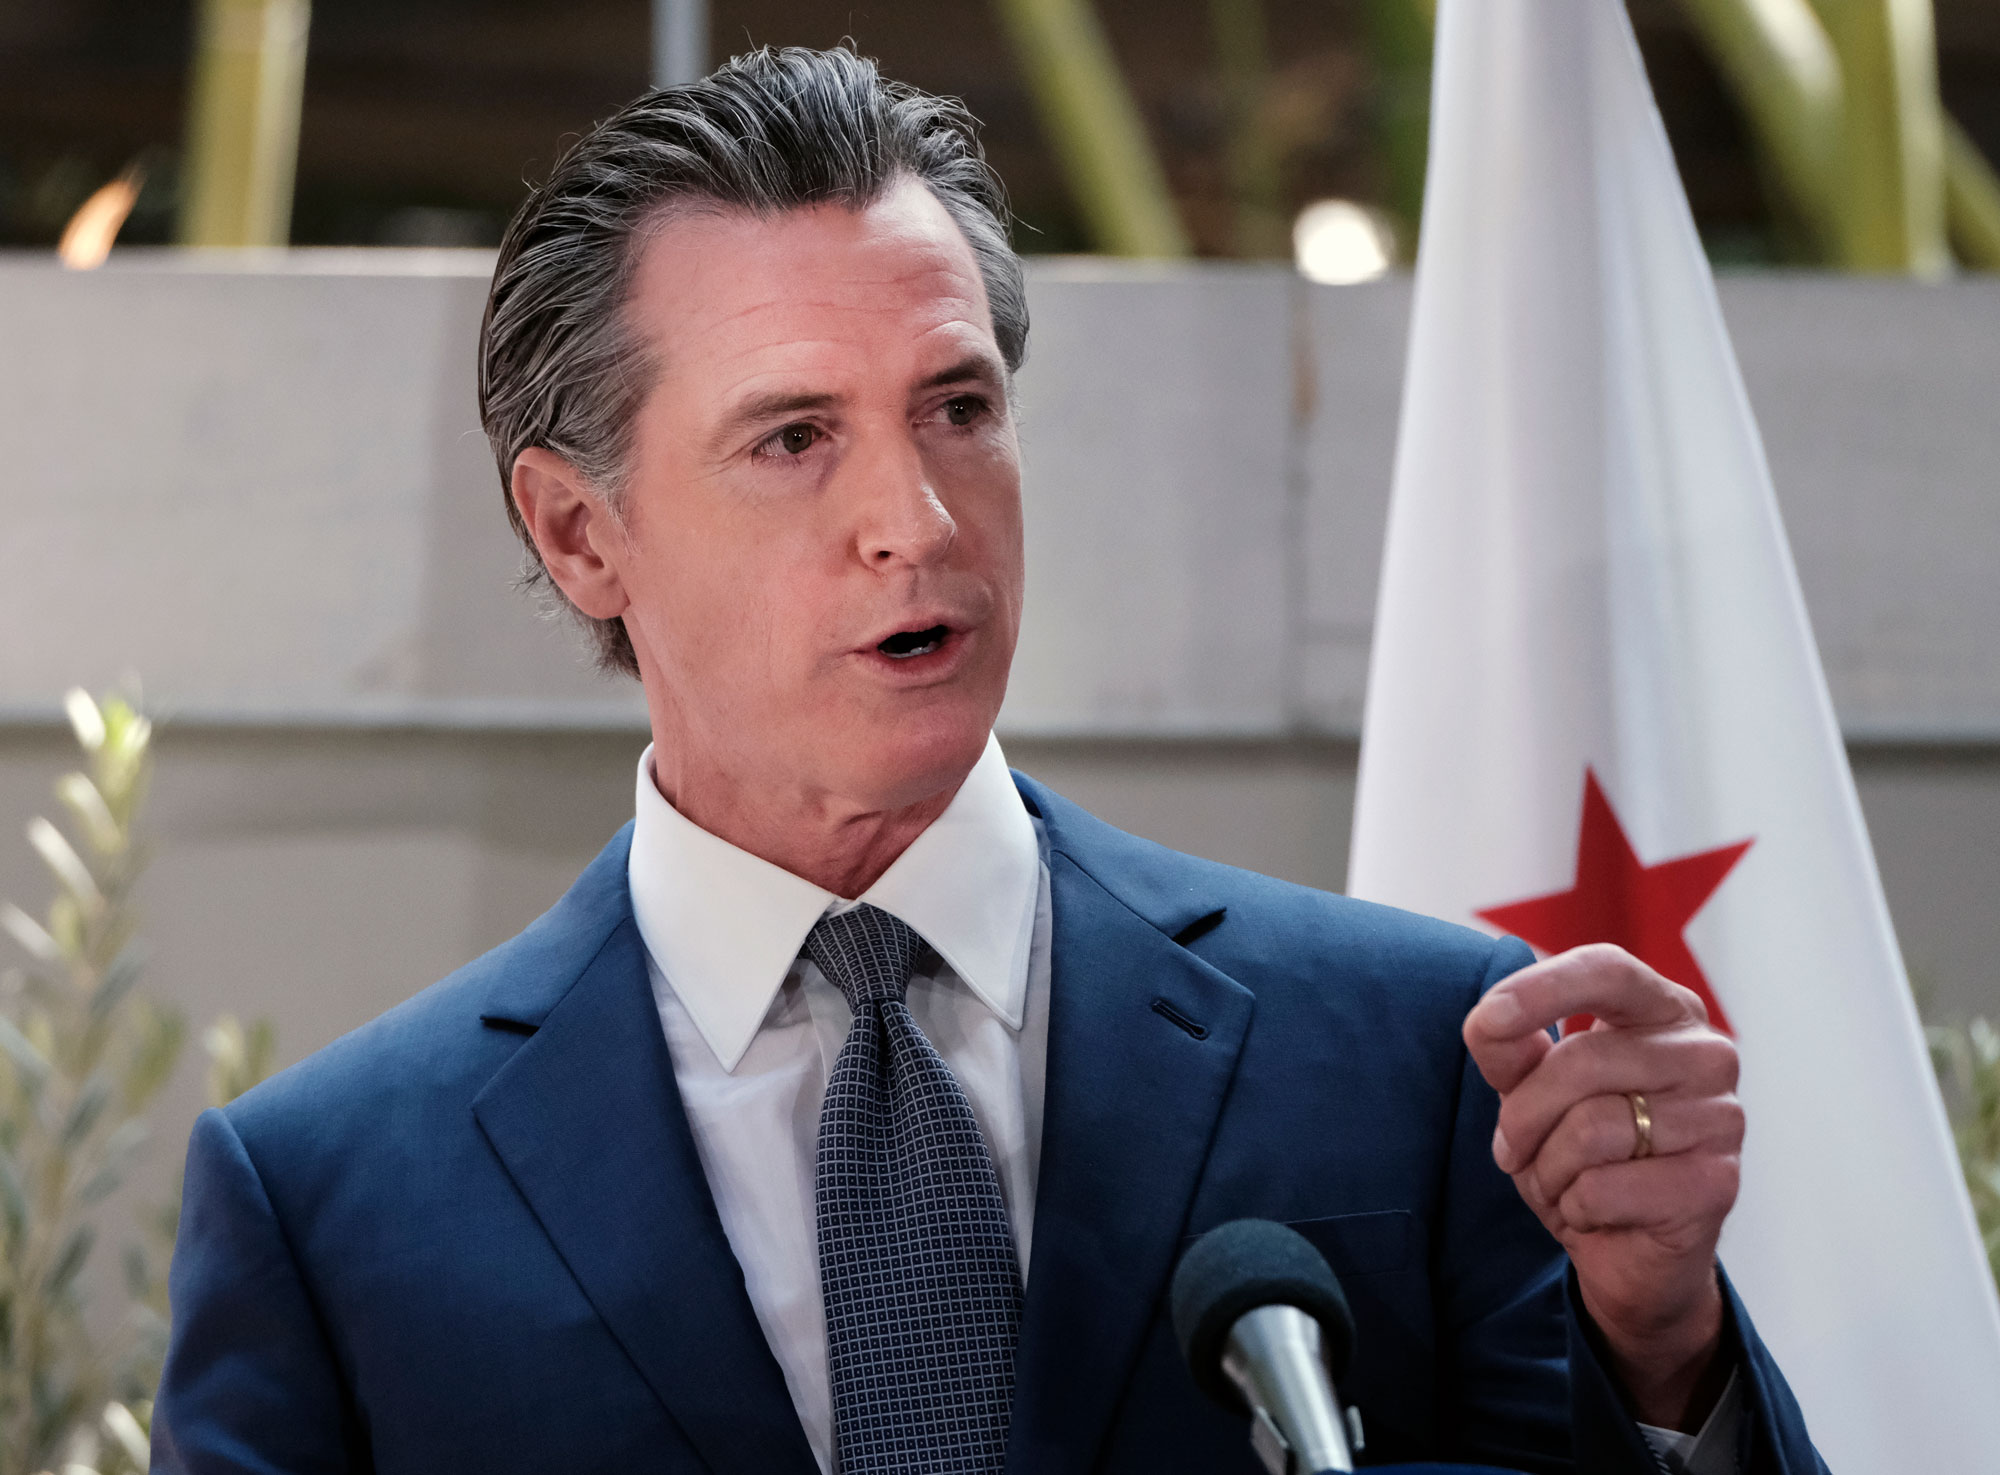 California Gov. Gavin Newsom answers questions at a news conference in Los Angeles, on June 9.